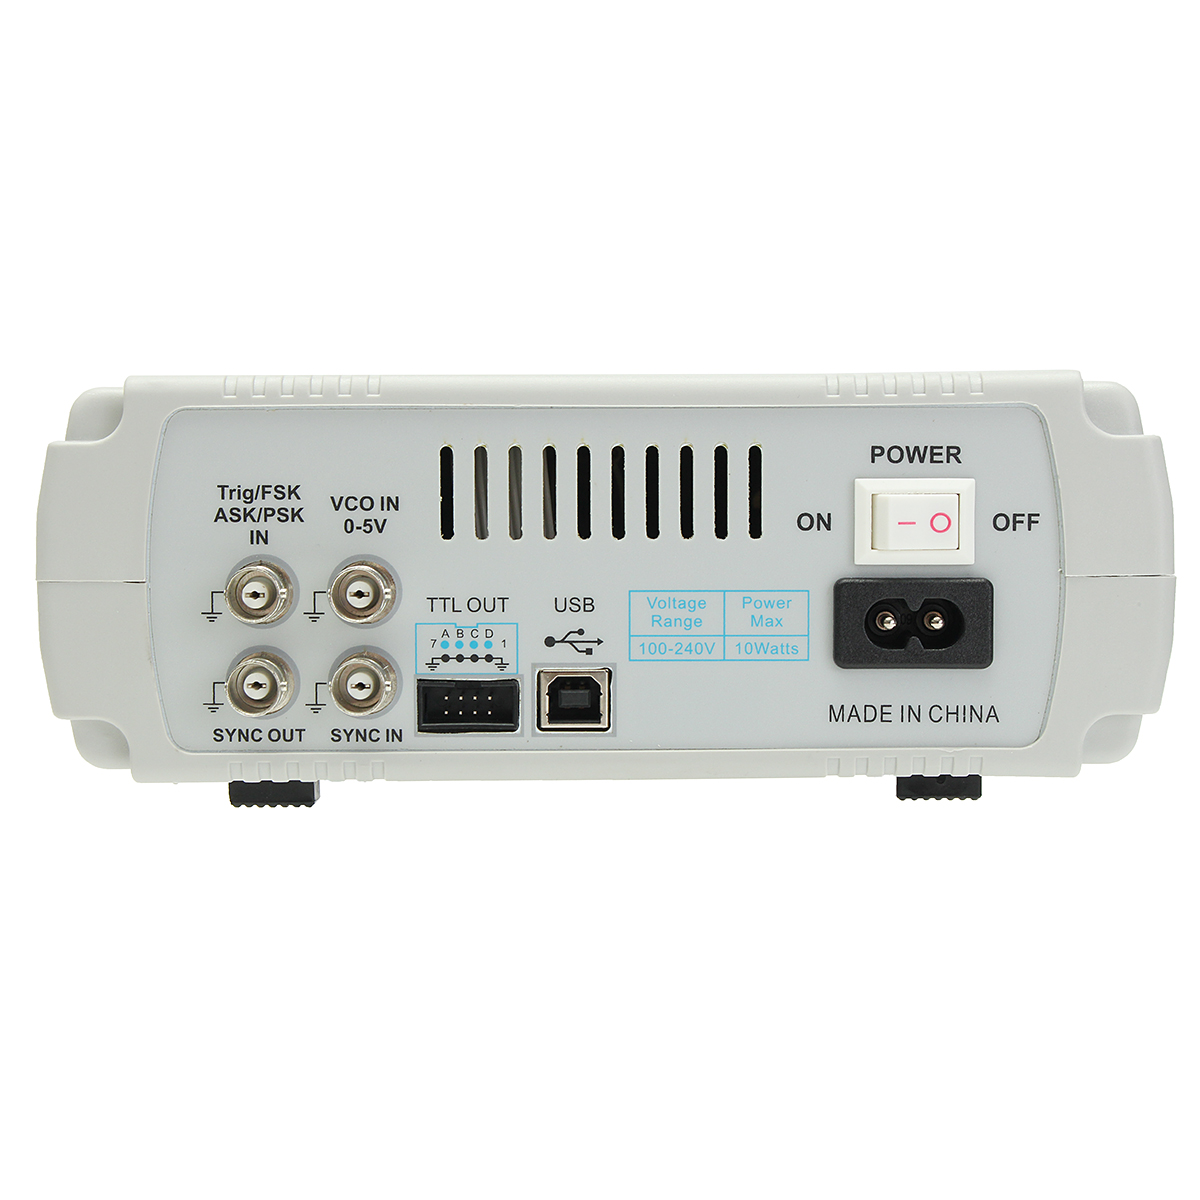 FY6600 Digital 12-60MHz Dual Channel DDS Function Arbitrary Waveform Signal Generator Frequency Meter 90